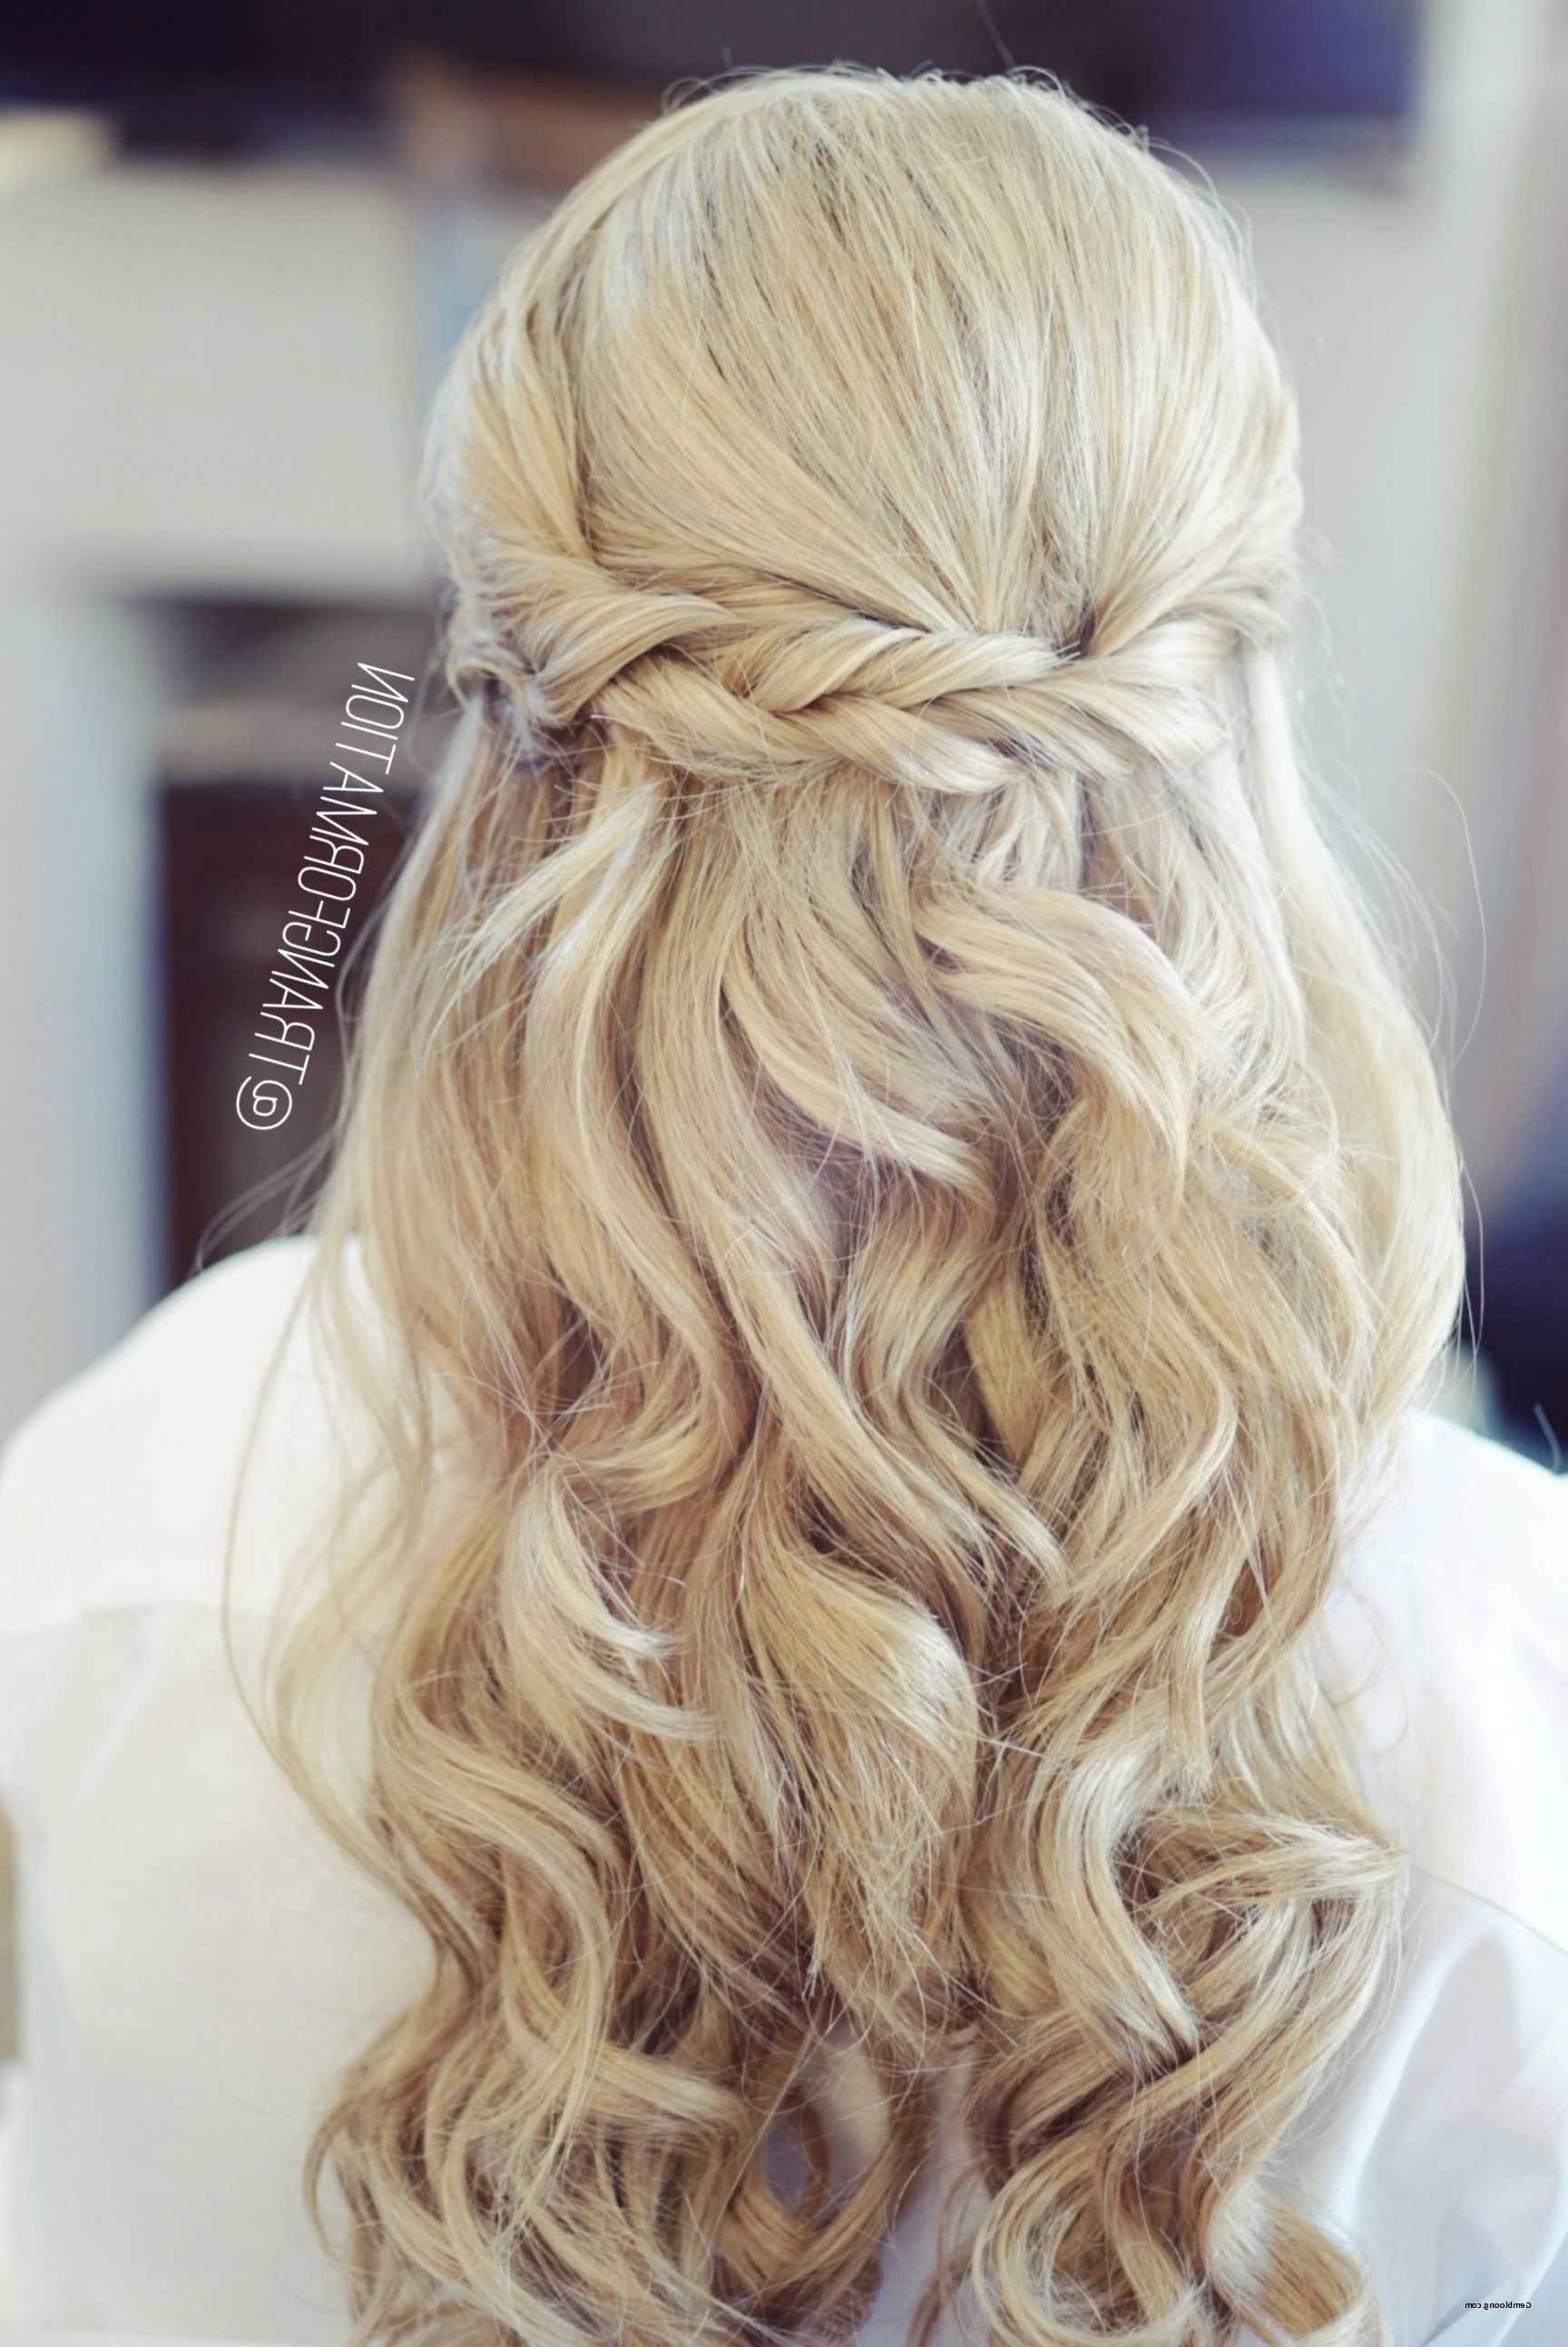 Elegant Hairstyles Half Up Half Down Lovely Half Up Half Down Bridal In 2017 Half Up Half Down Wedding Hairstyles (View 8 of 15)